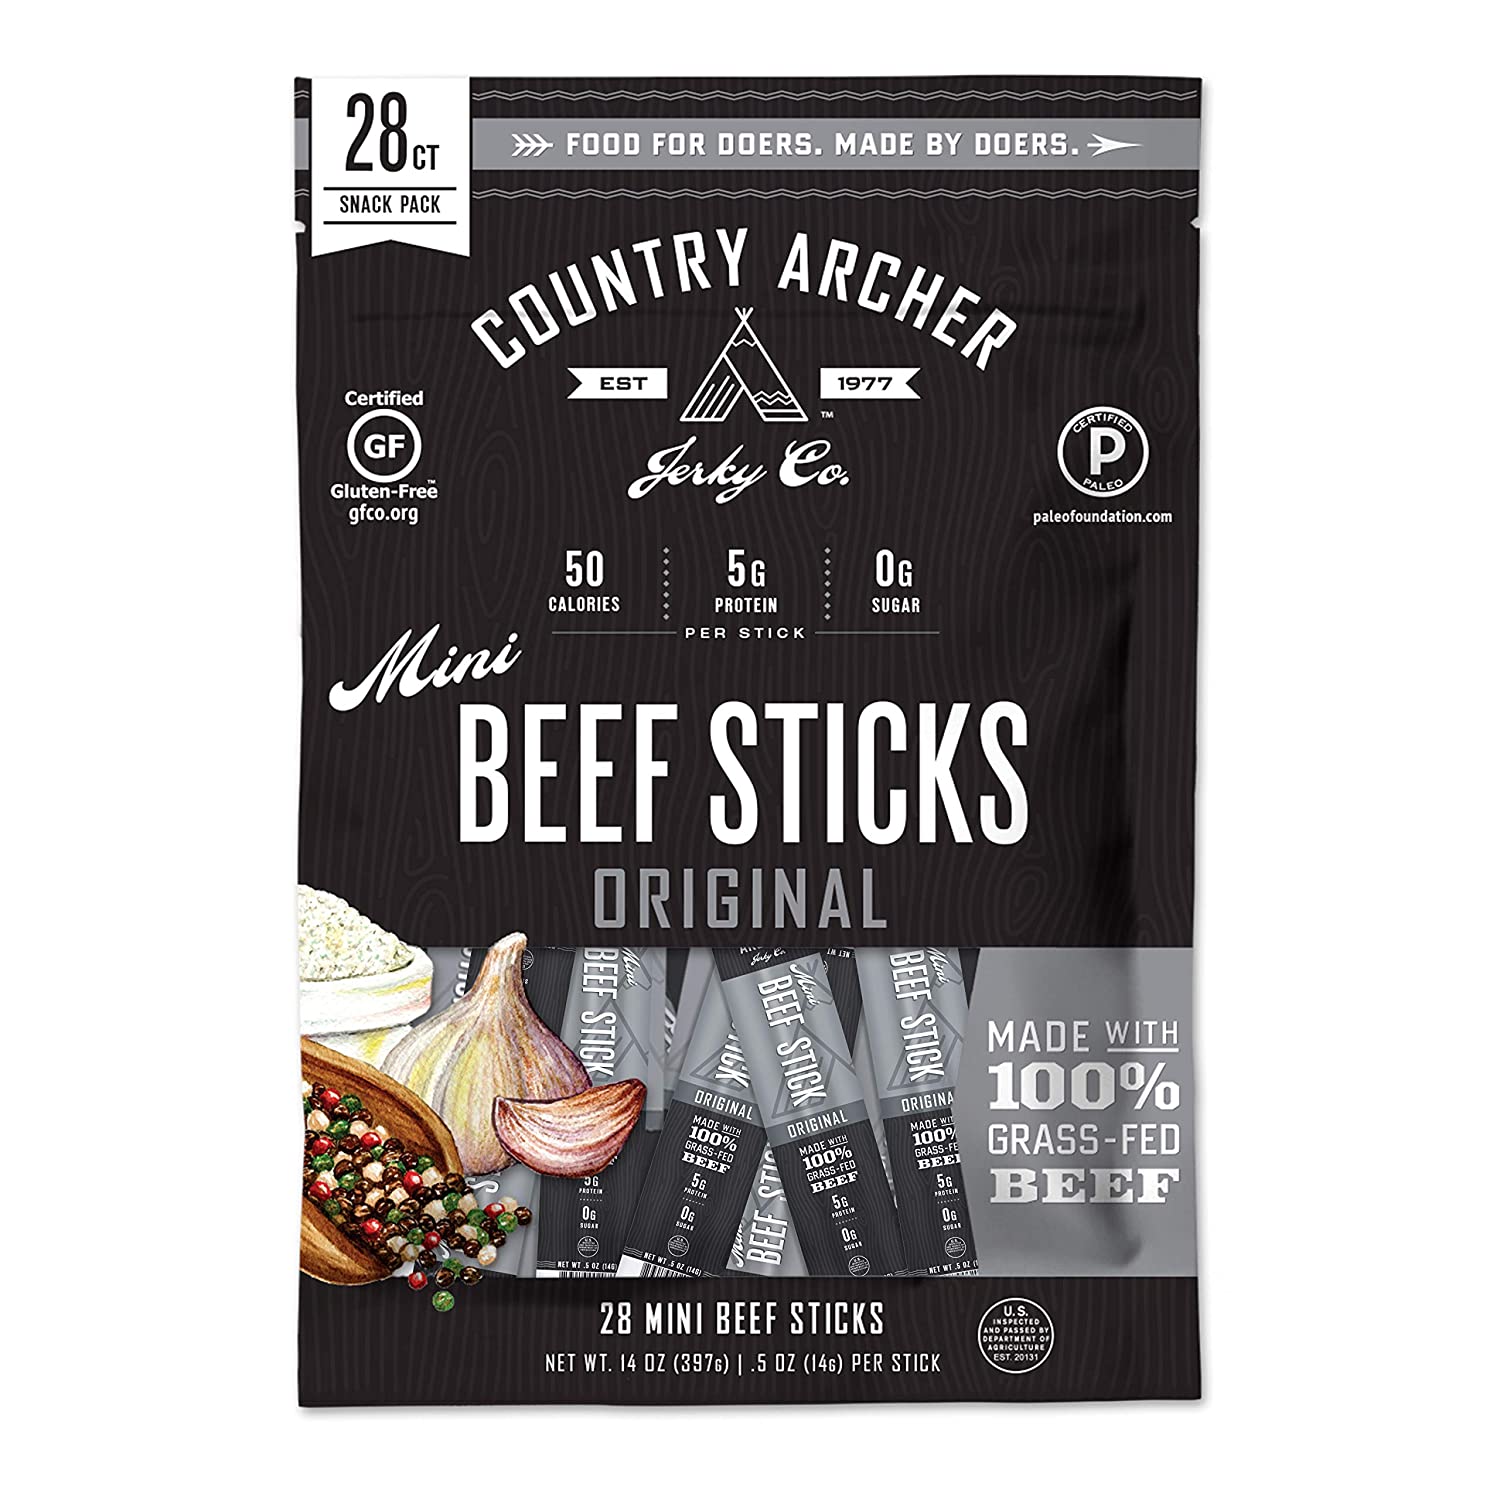 bag of Country Archer mini beef sticks